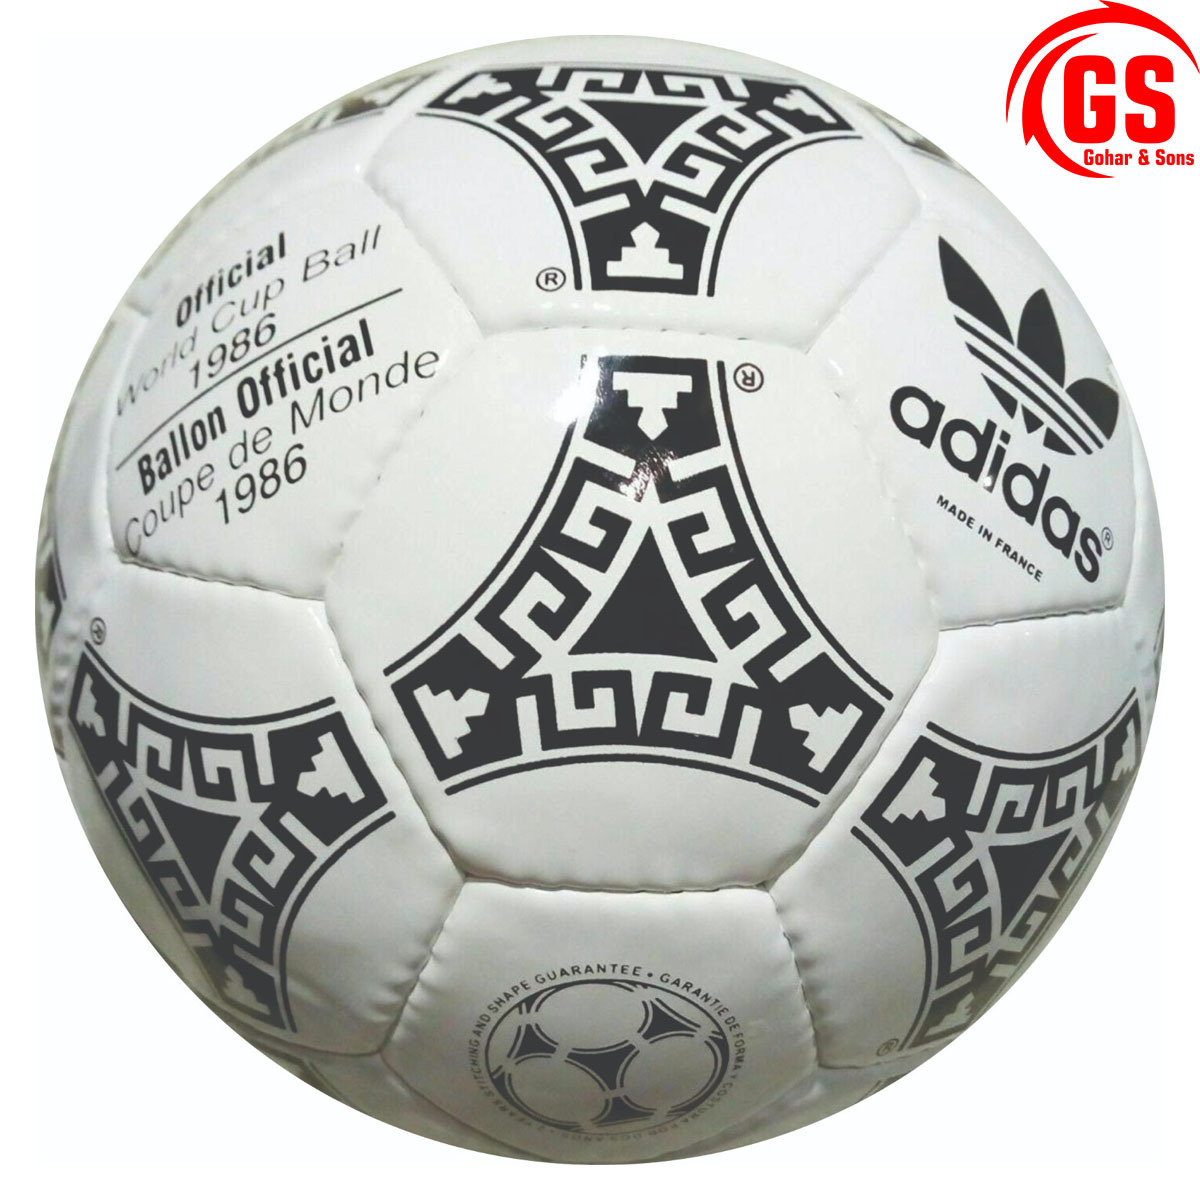 Adidas Match Ball Of FIFA World Cup 1998- Leather Football-Size 5